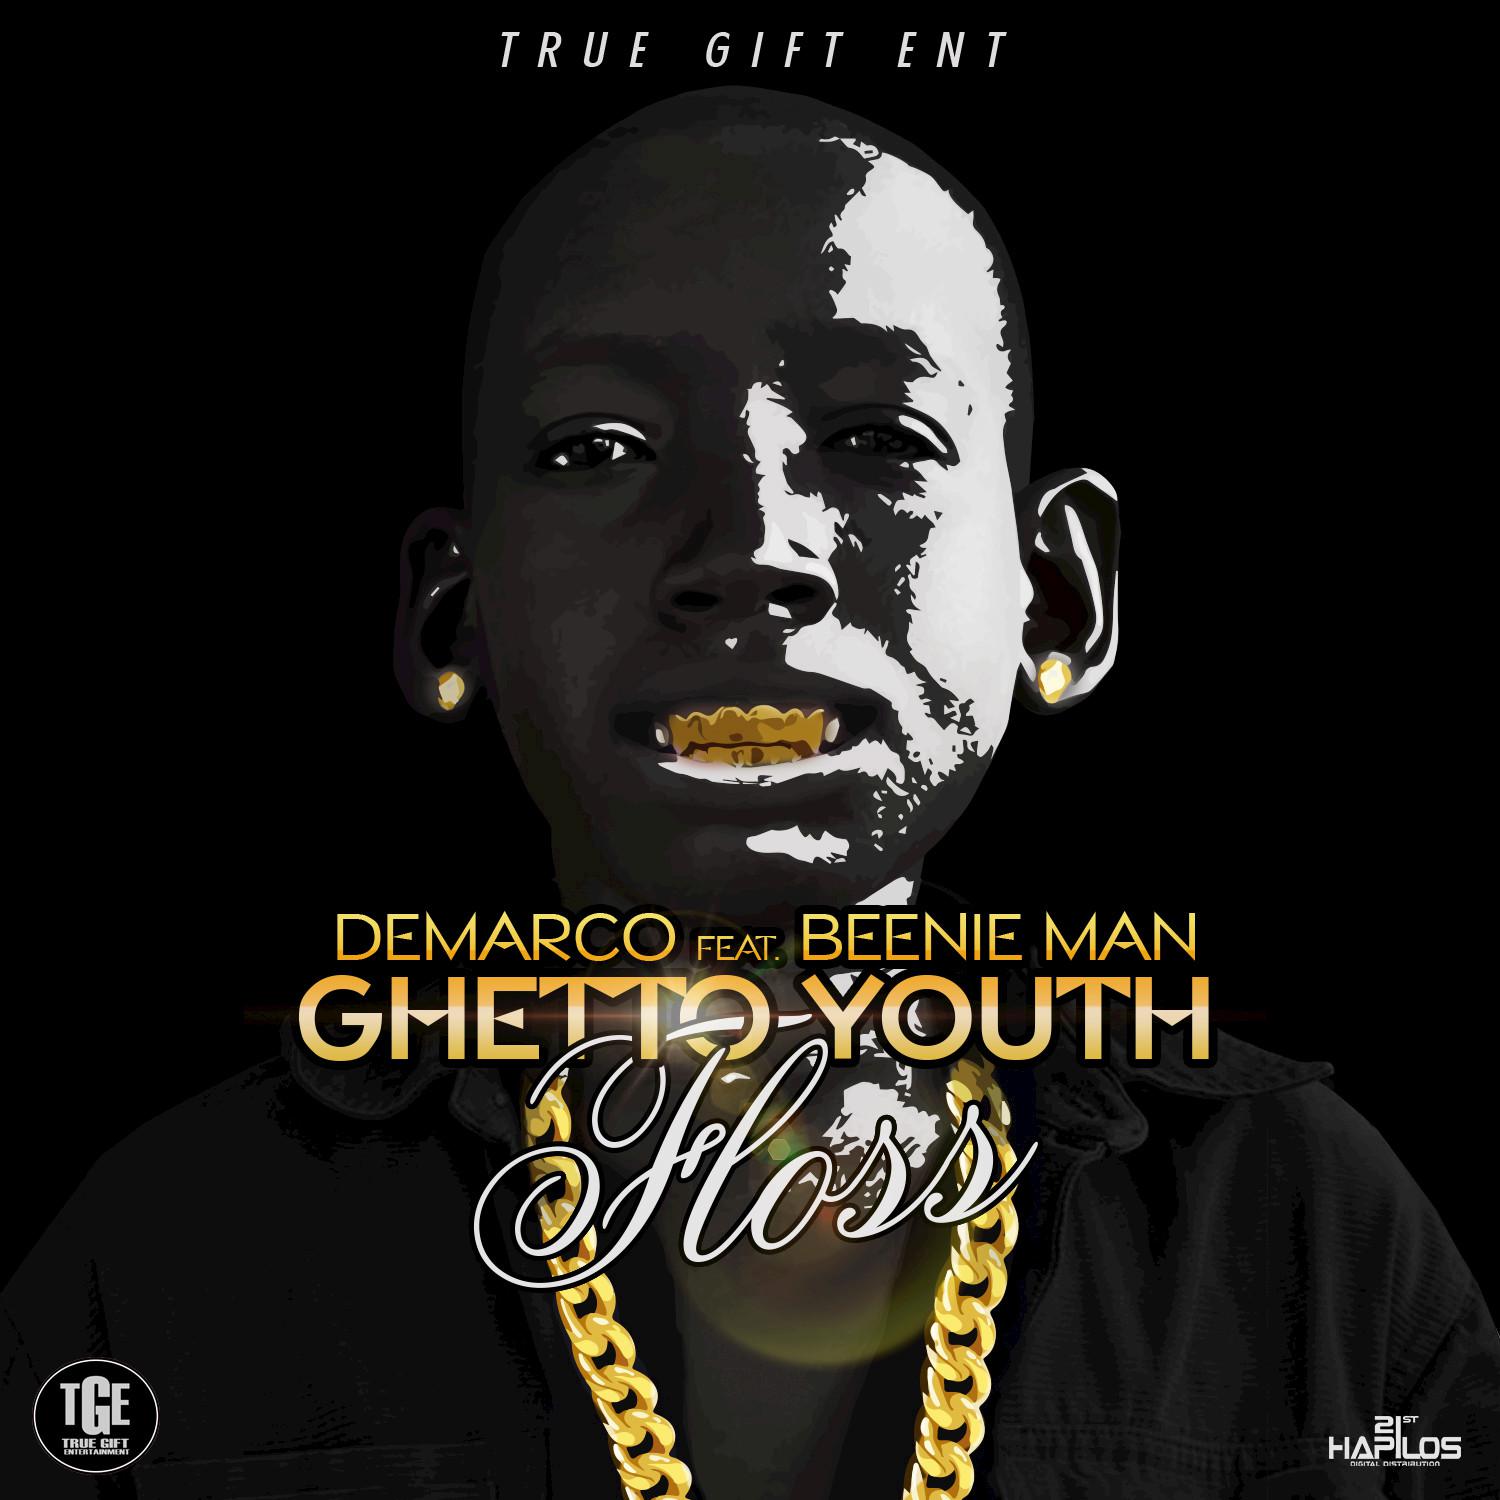 Ghetto Youth Floss (feat. Beenie Man)